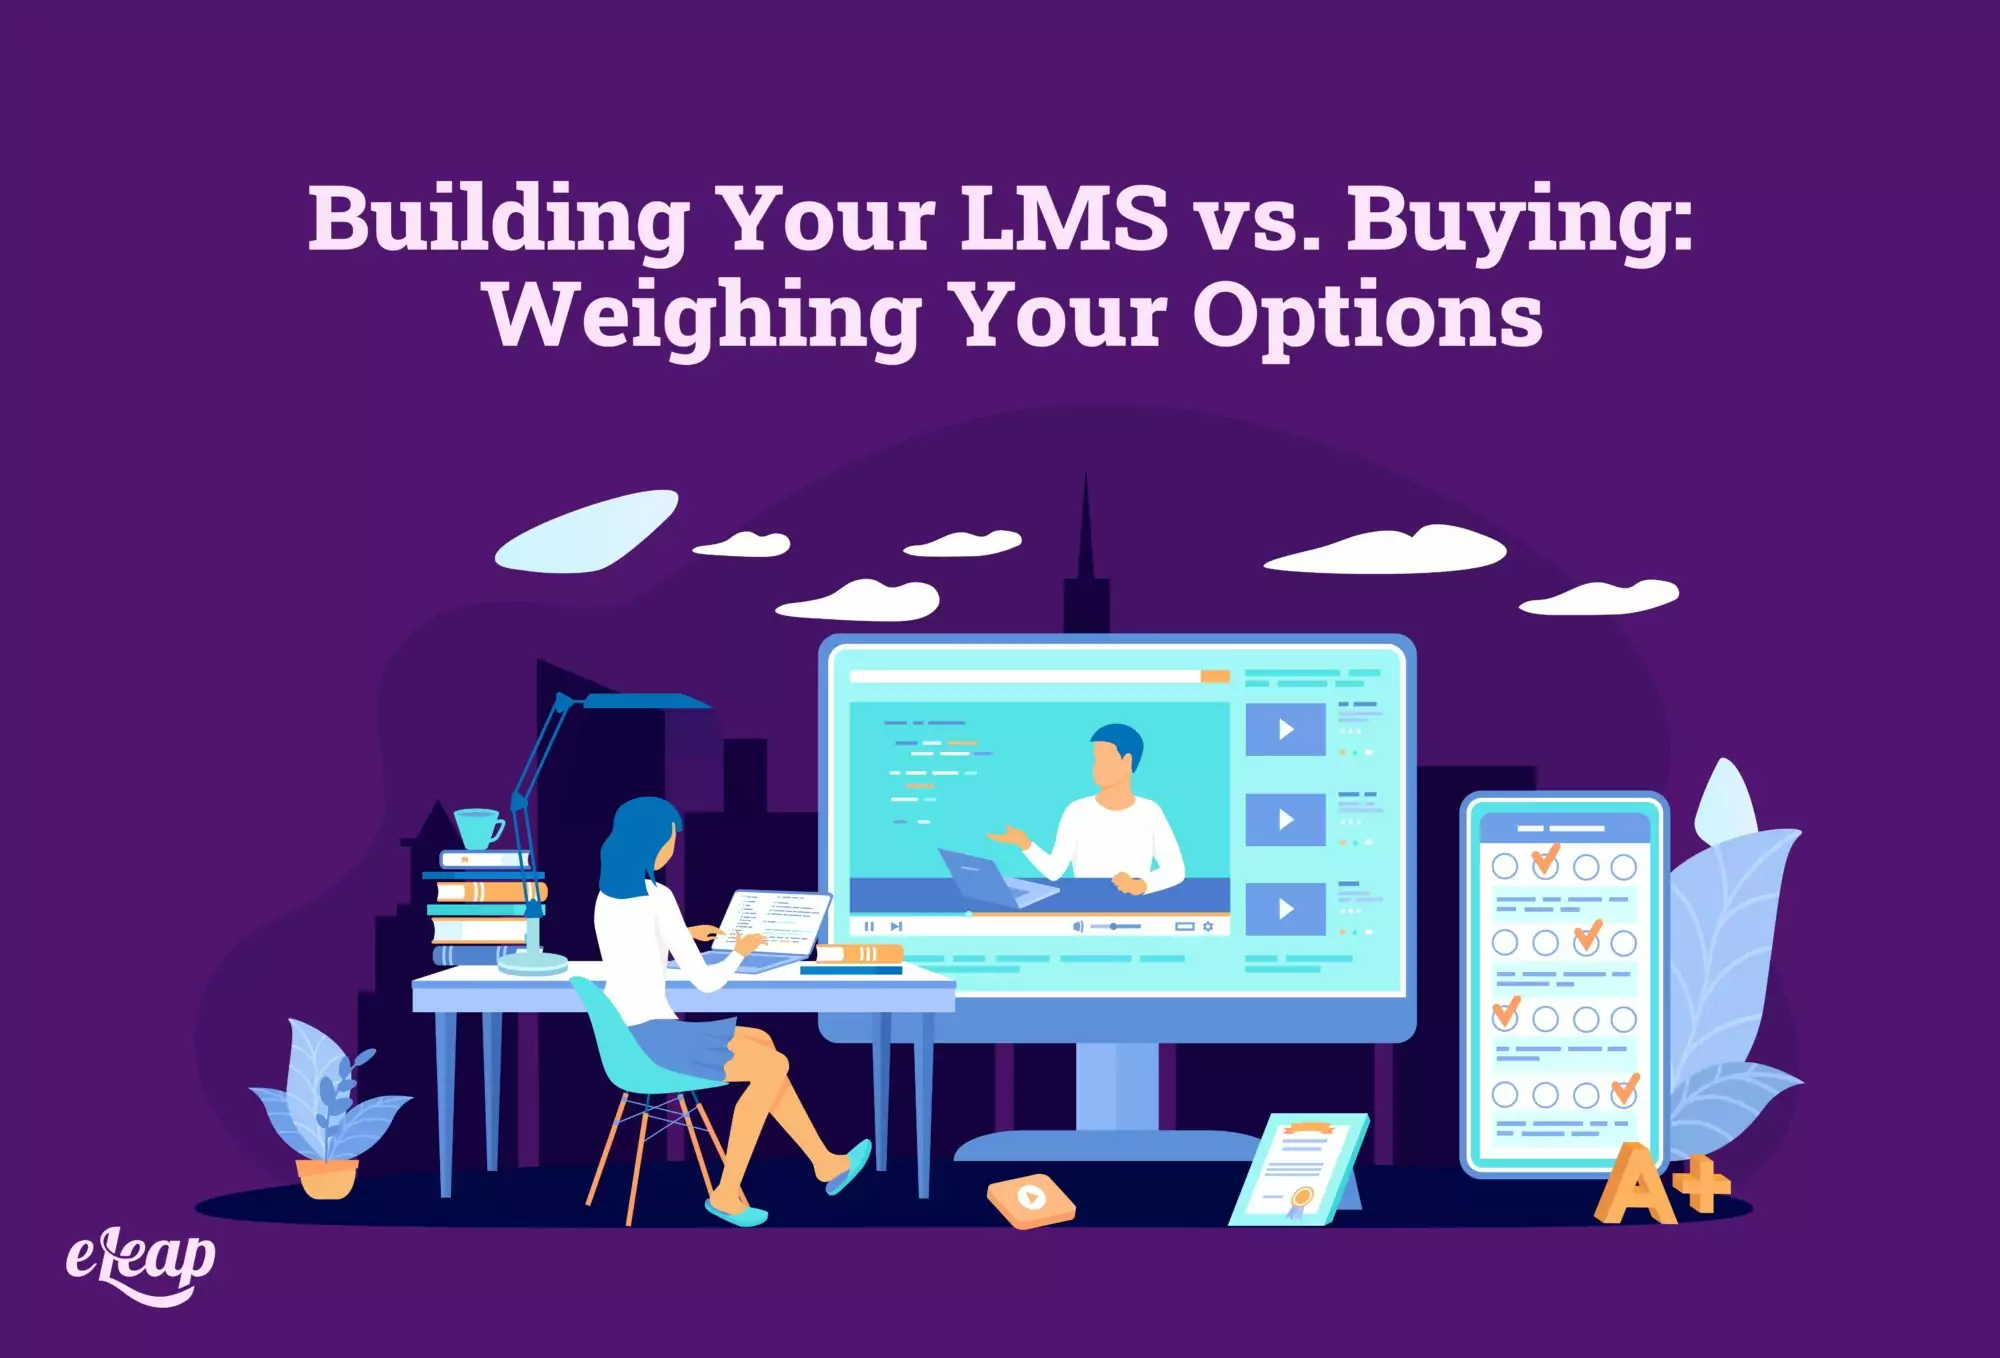 Building Your LMS vs. Buying: Weighing Your Options